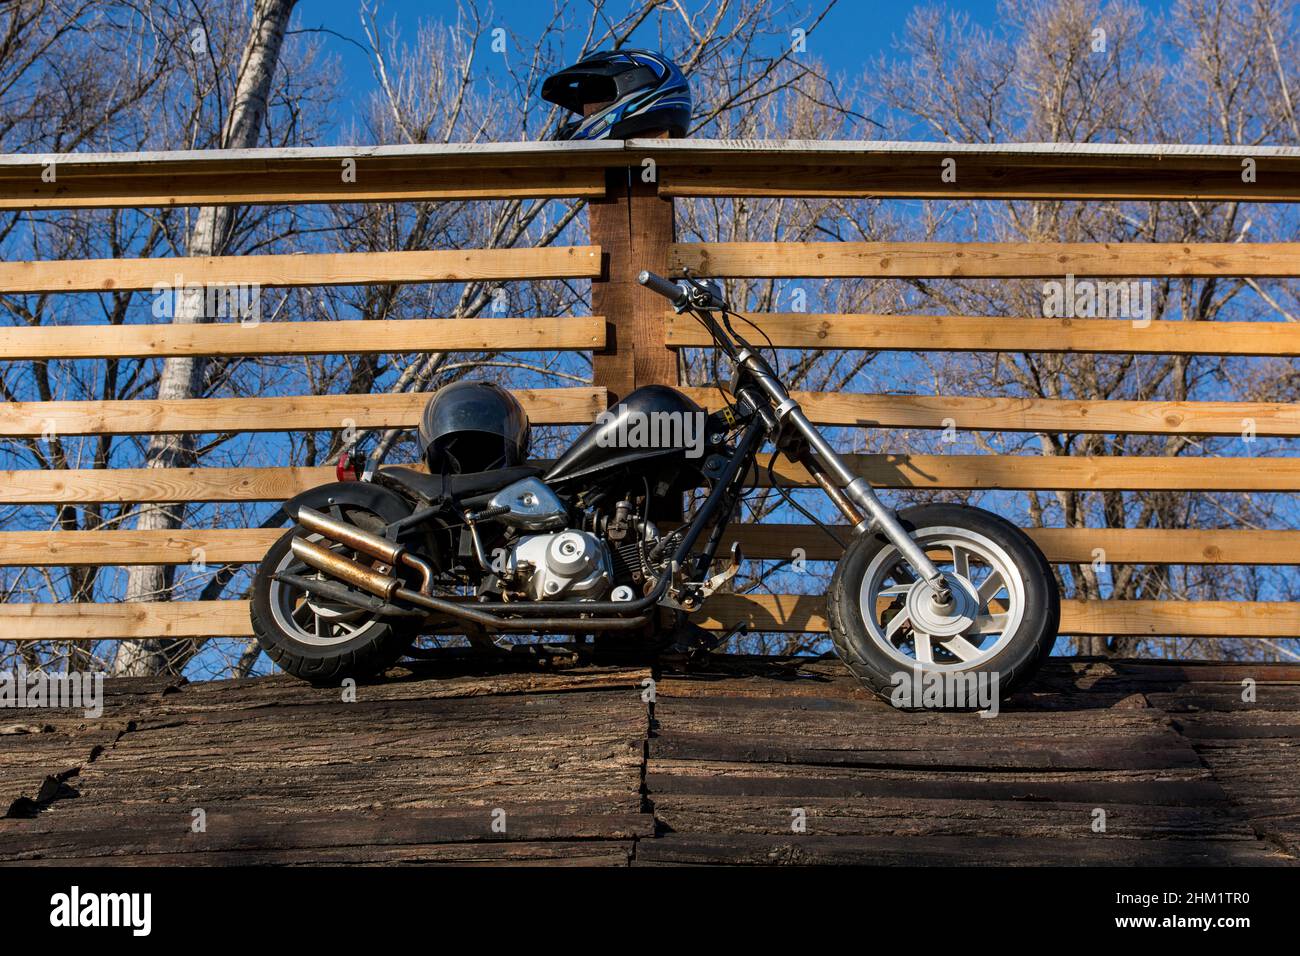 Nis, Serbia - February 06. 2022 Old black motorcycle on a wooden roof leaning against a railing and blue sky in the background on sunny day Stock Photo